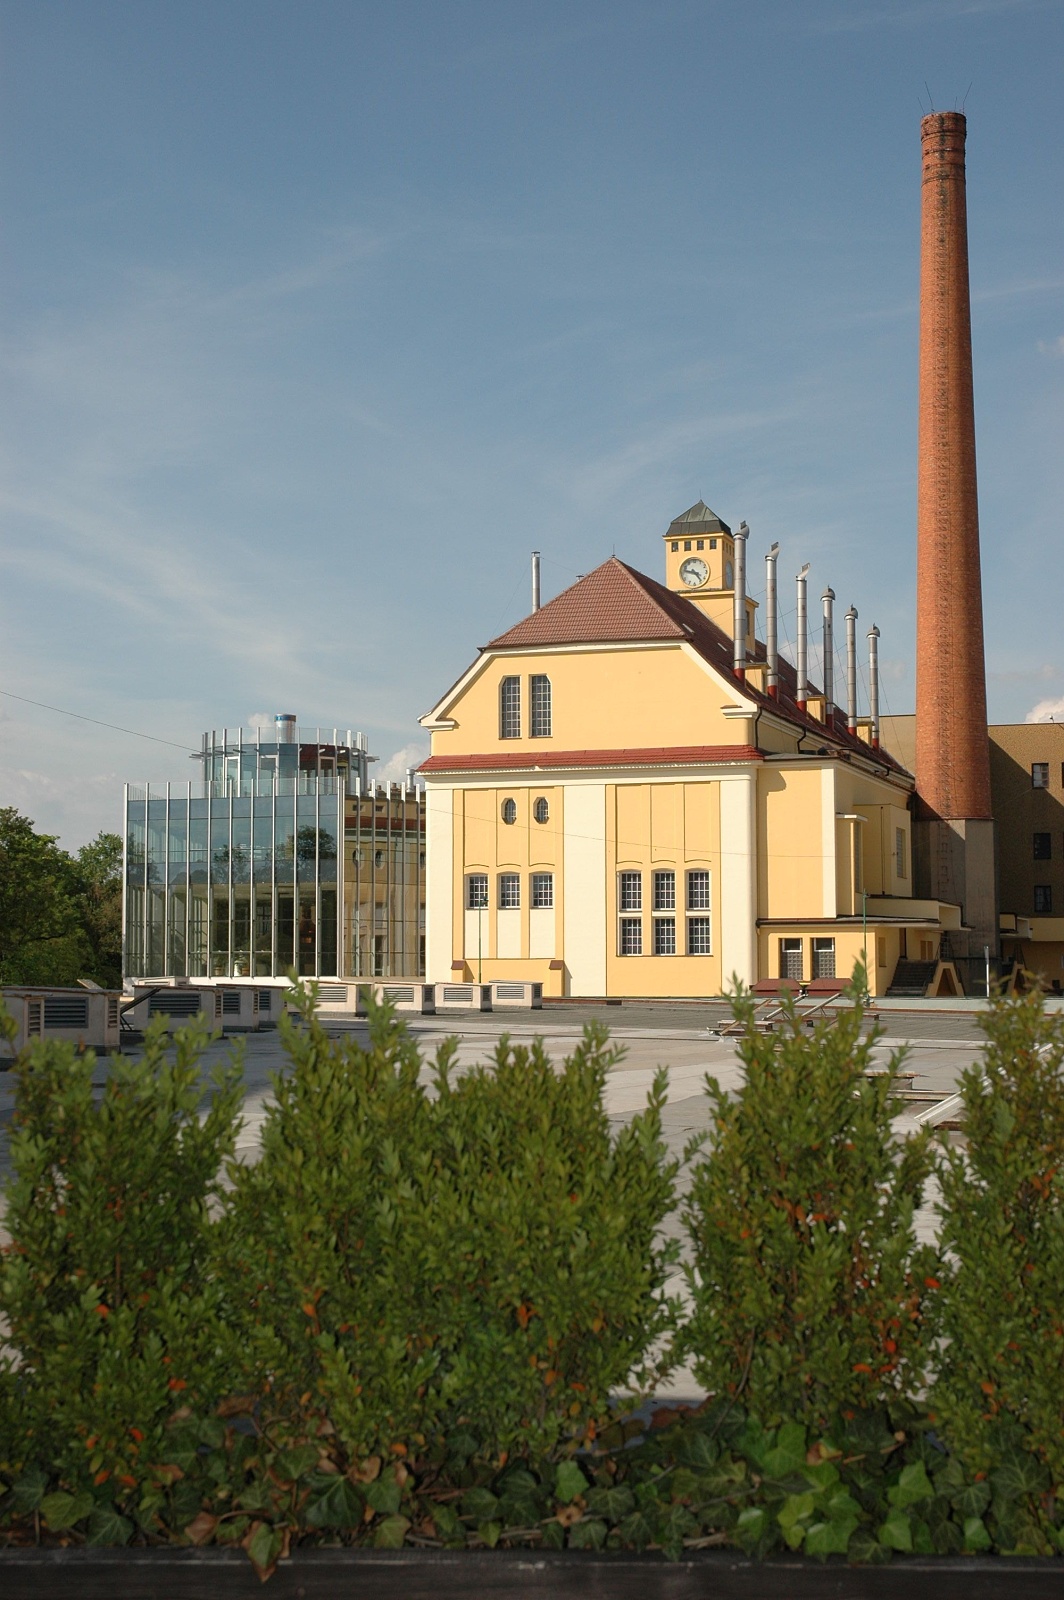 Building of the Pilsen brewery brew house